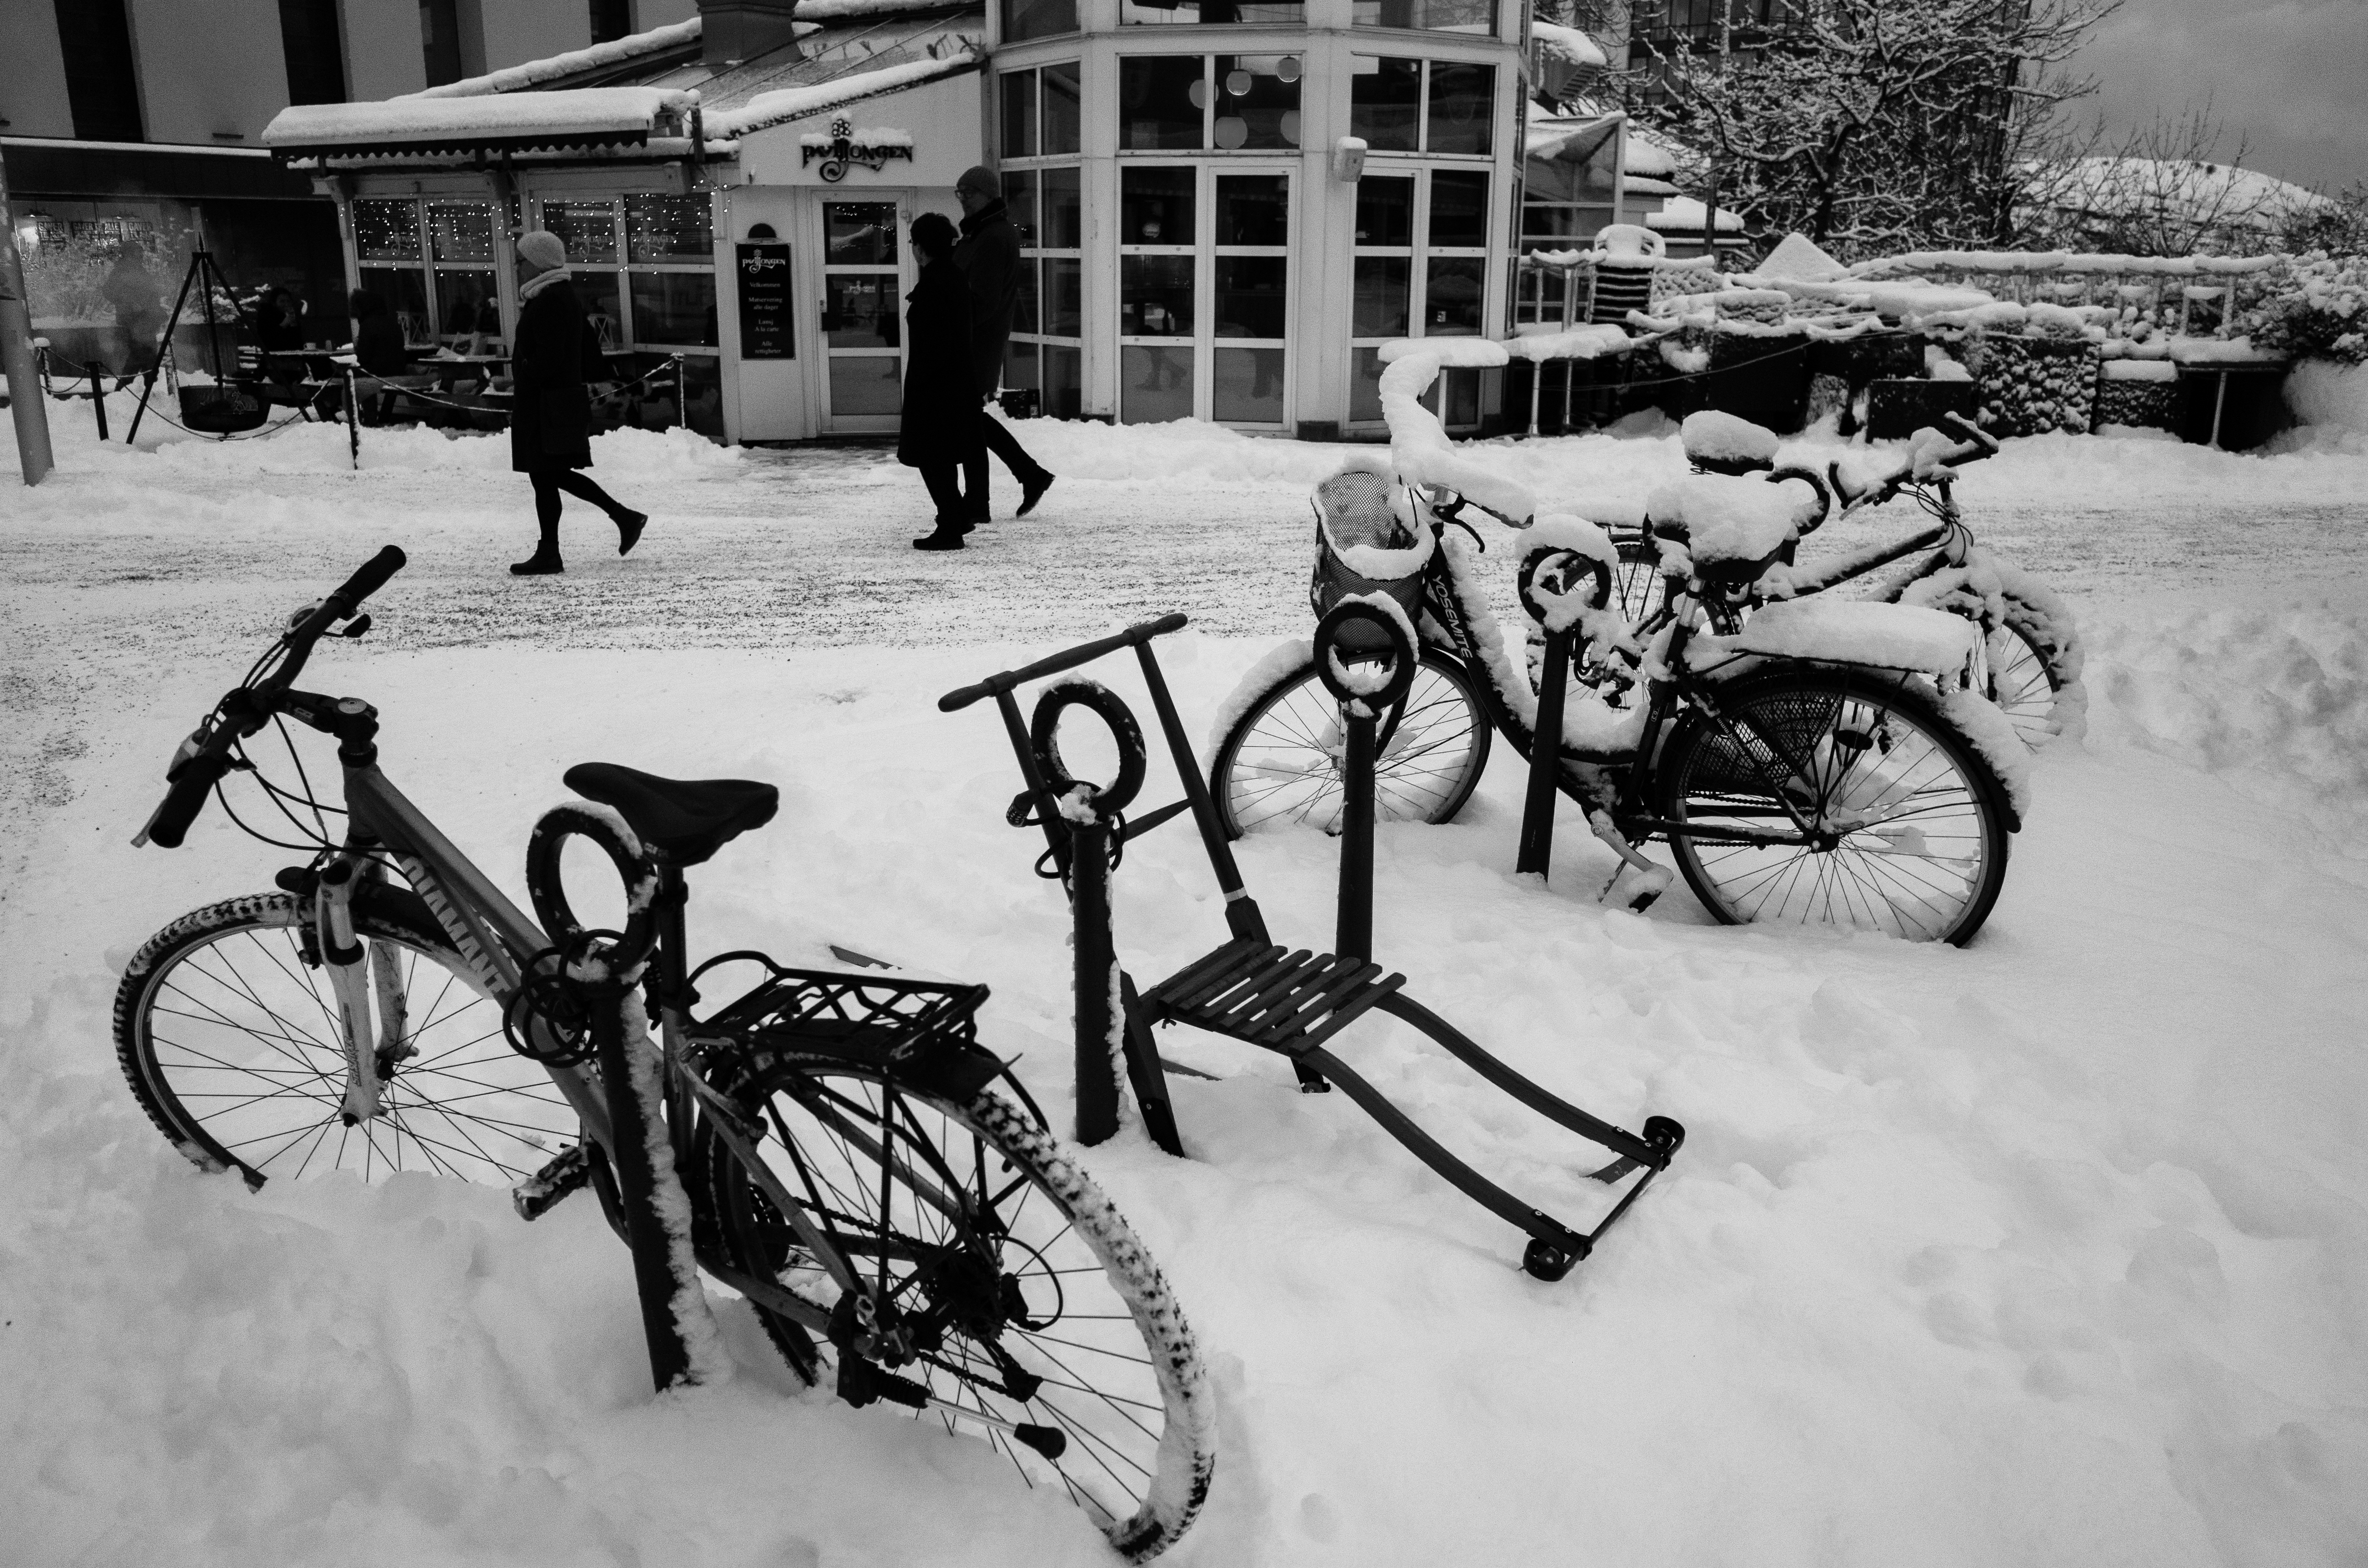 Kicksled & bicycles in snow. bodø, norway photo